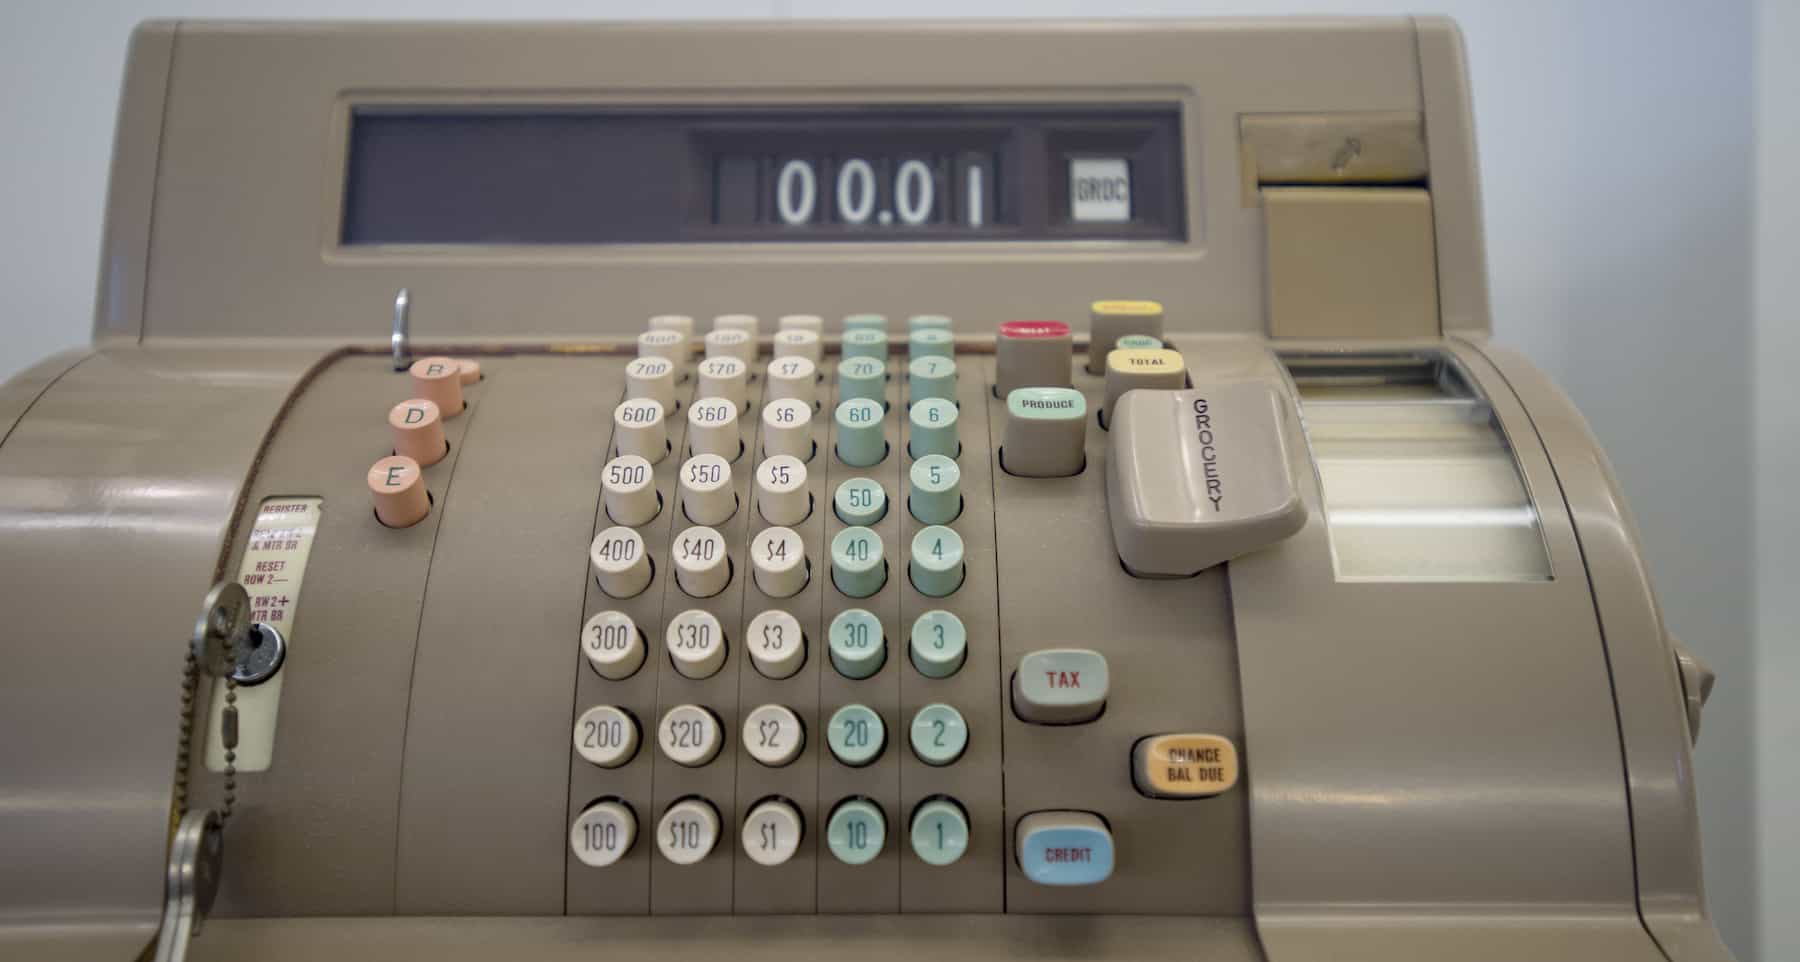 An old school cash register to illustrate a payments optimization story